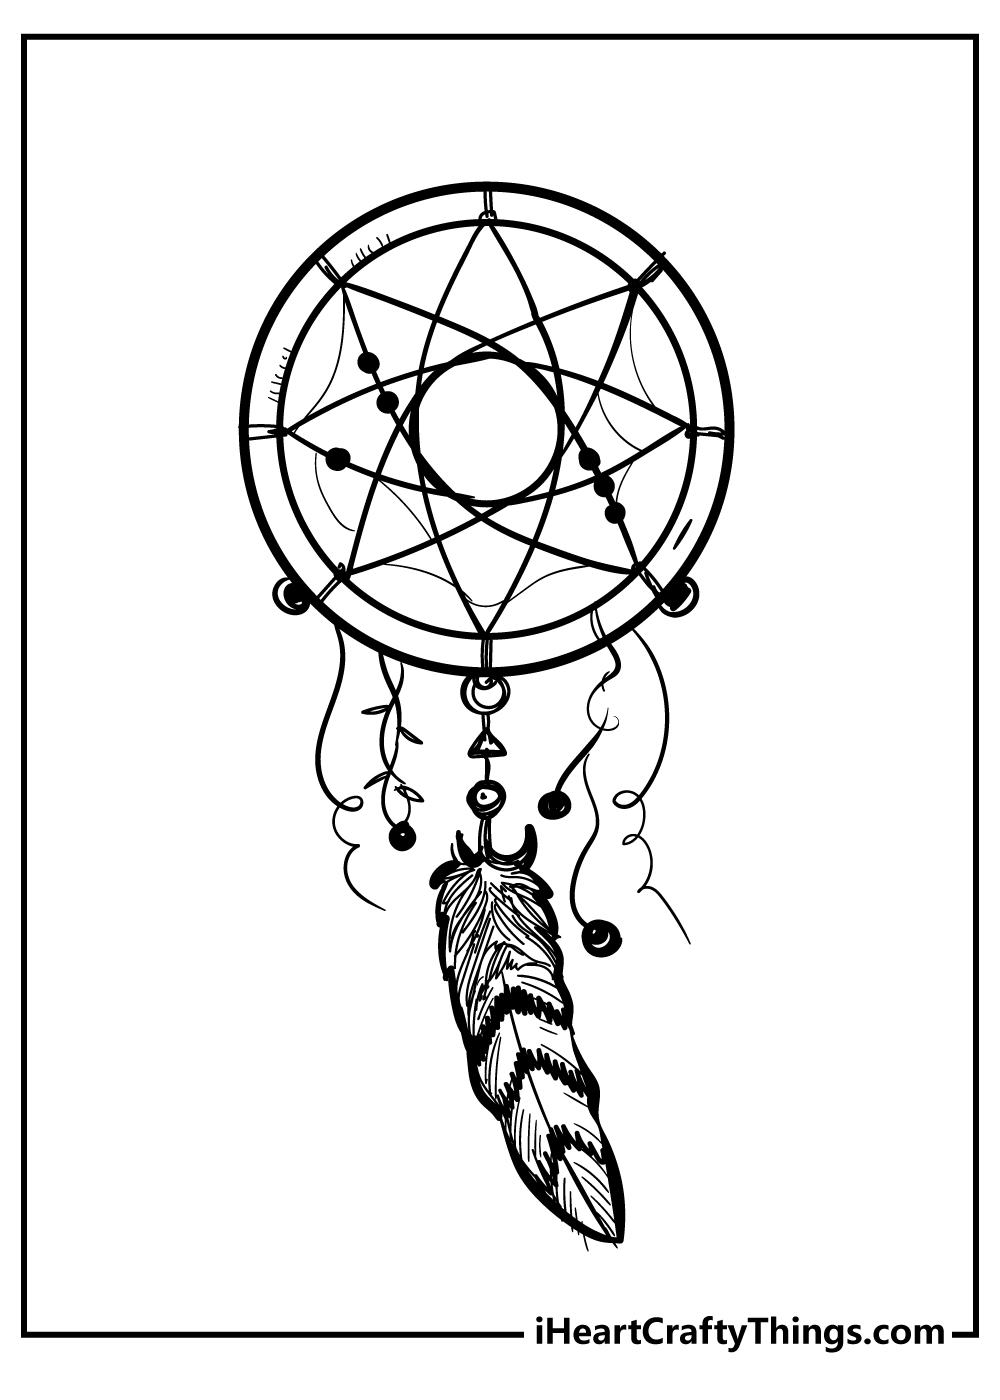 Dream Catcher Coloring Pages for kids free download